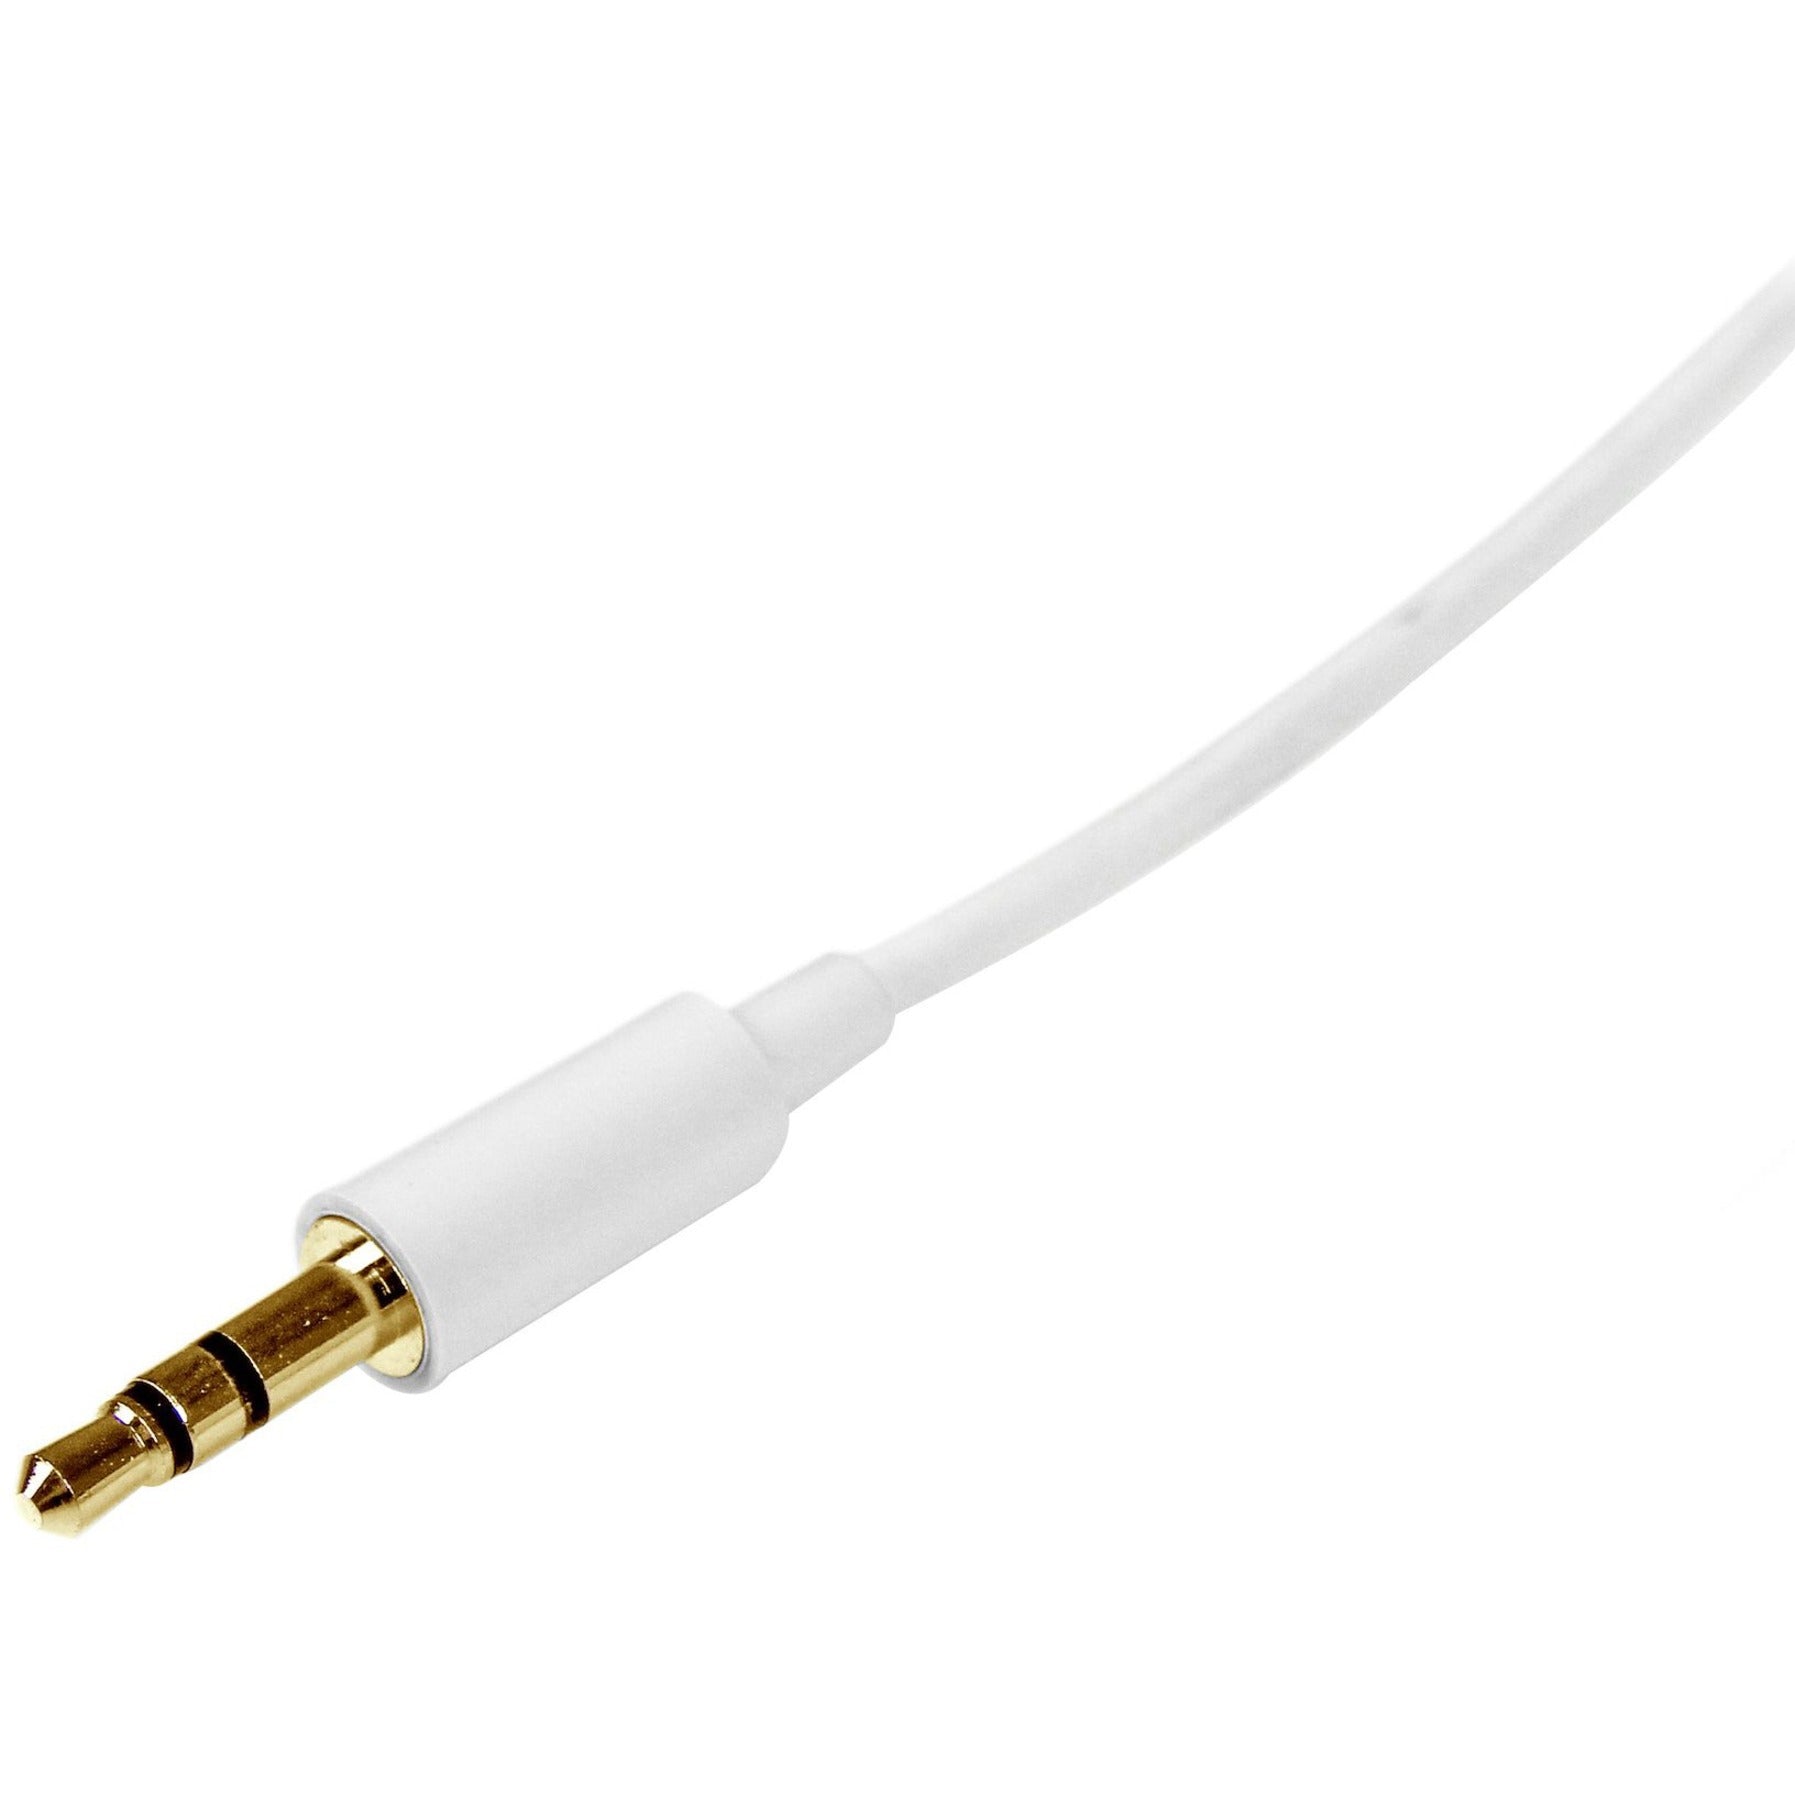 StarTech.com MU3MMMSWH 3m White Slim 3.5mm Stereo Audio Cable - Male to Male, Molded, Copper Conductor, 9.84 ft Length